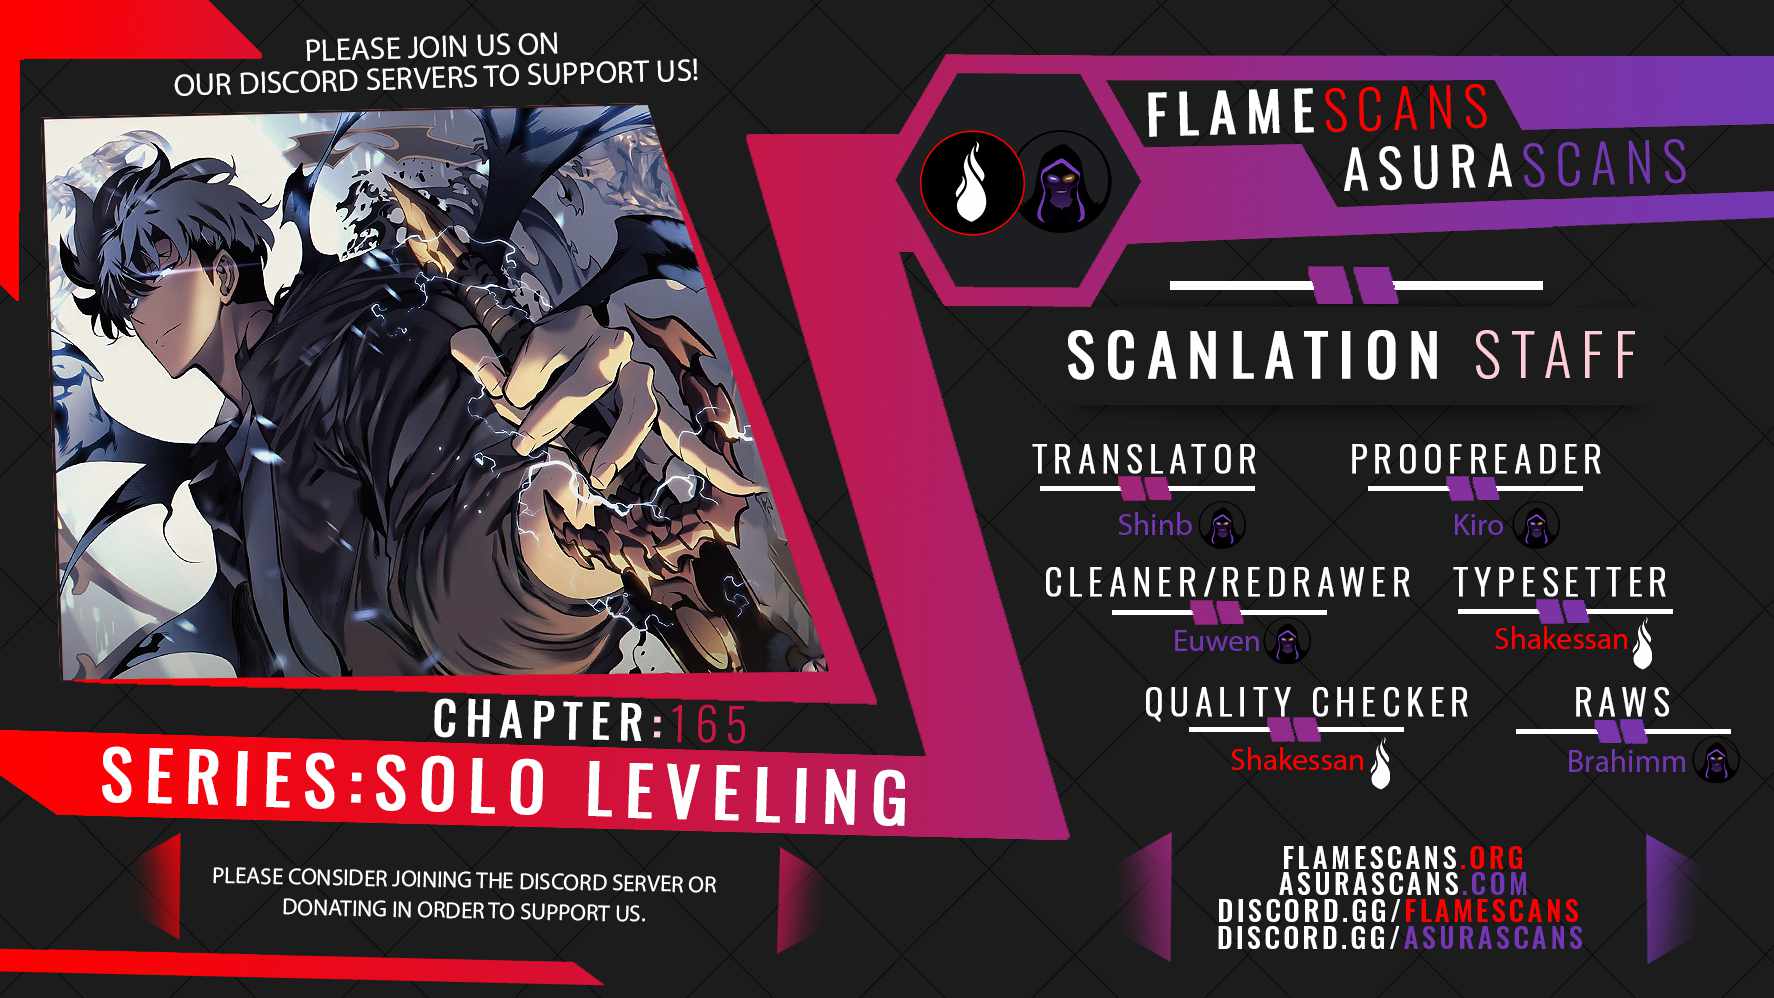 solo leveling Chapter 165, solo leveling 165, Read solo leveling Chapter 165, solo leveling Chapter 165 Manga, solo leveling Chapter 165 english, solo leveling Chapter 165 raw manga, solo leveling Chapter 165 online, solo leveling Chapter 165 high quality, solo leveling 165 chapter, solo leveling Chapter 165 manga scan